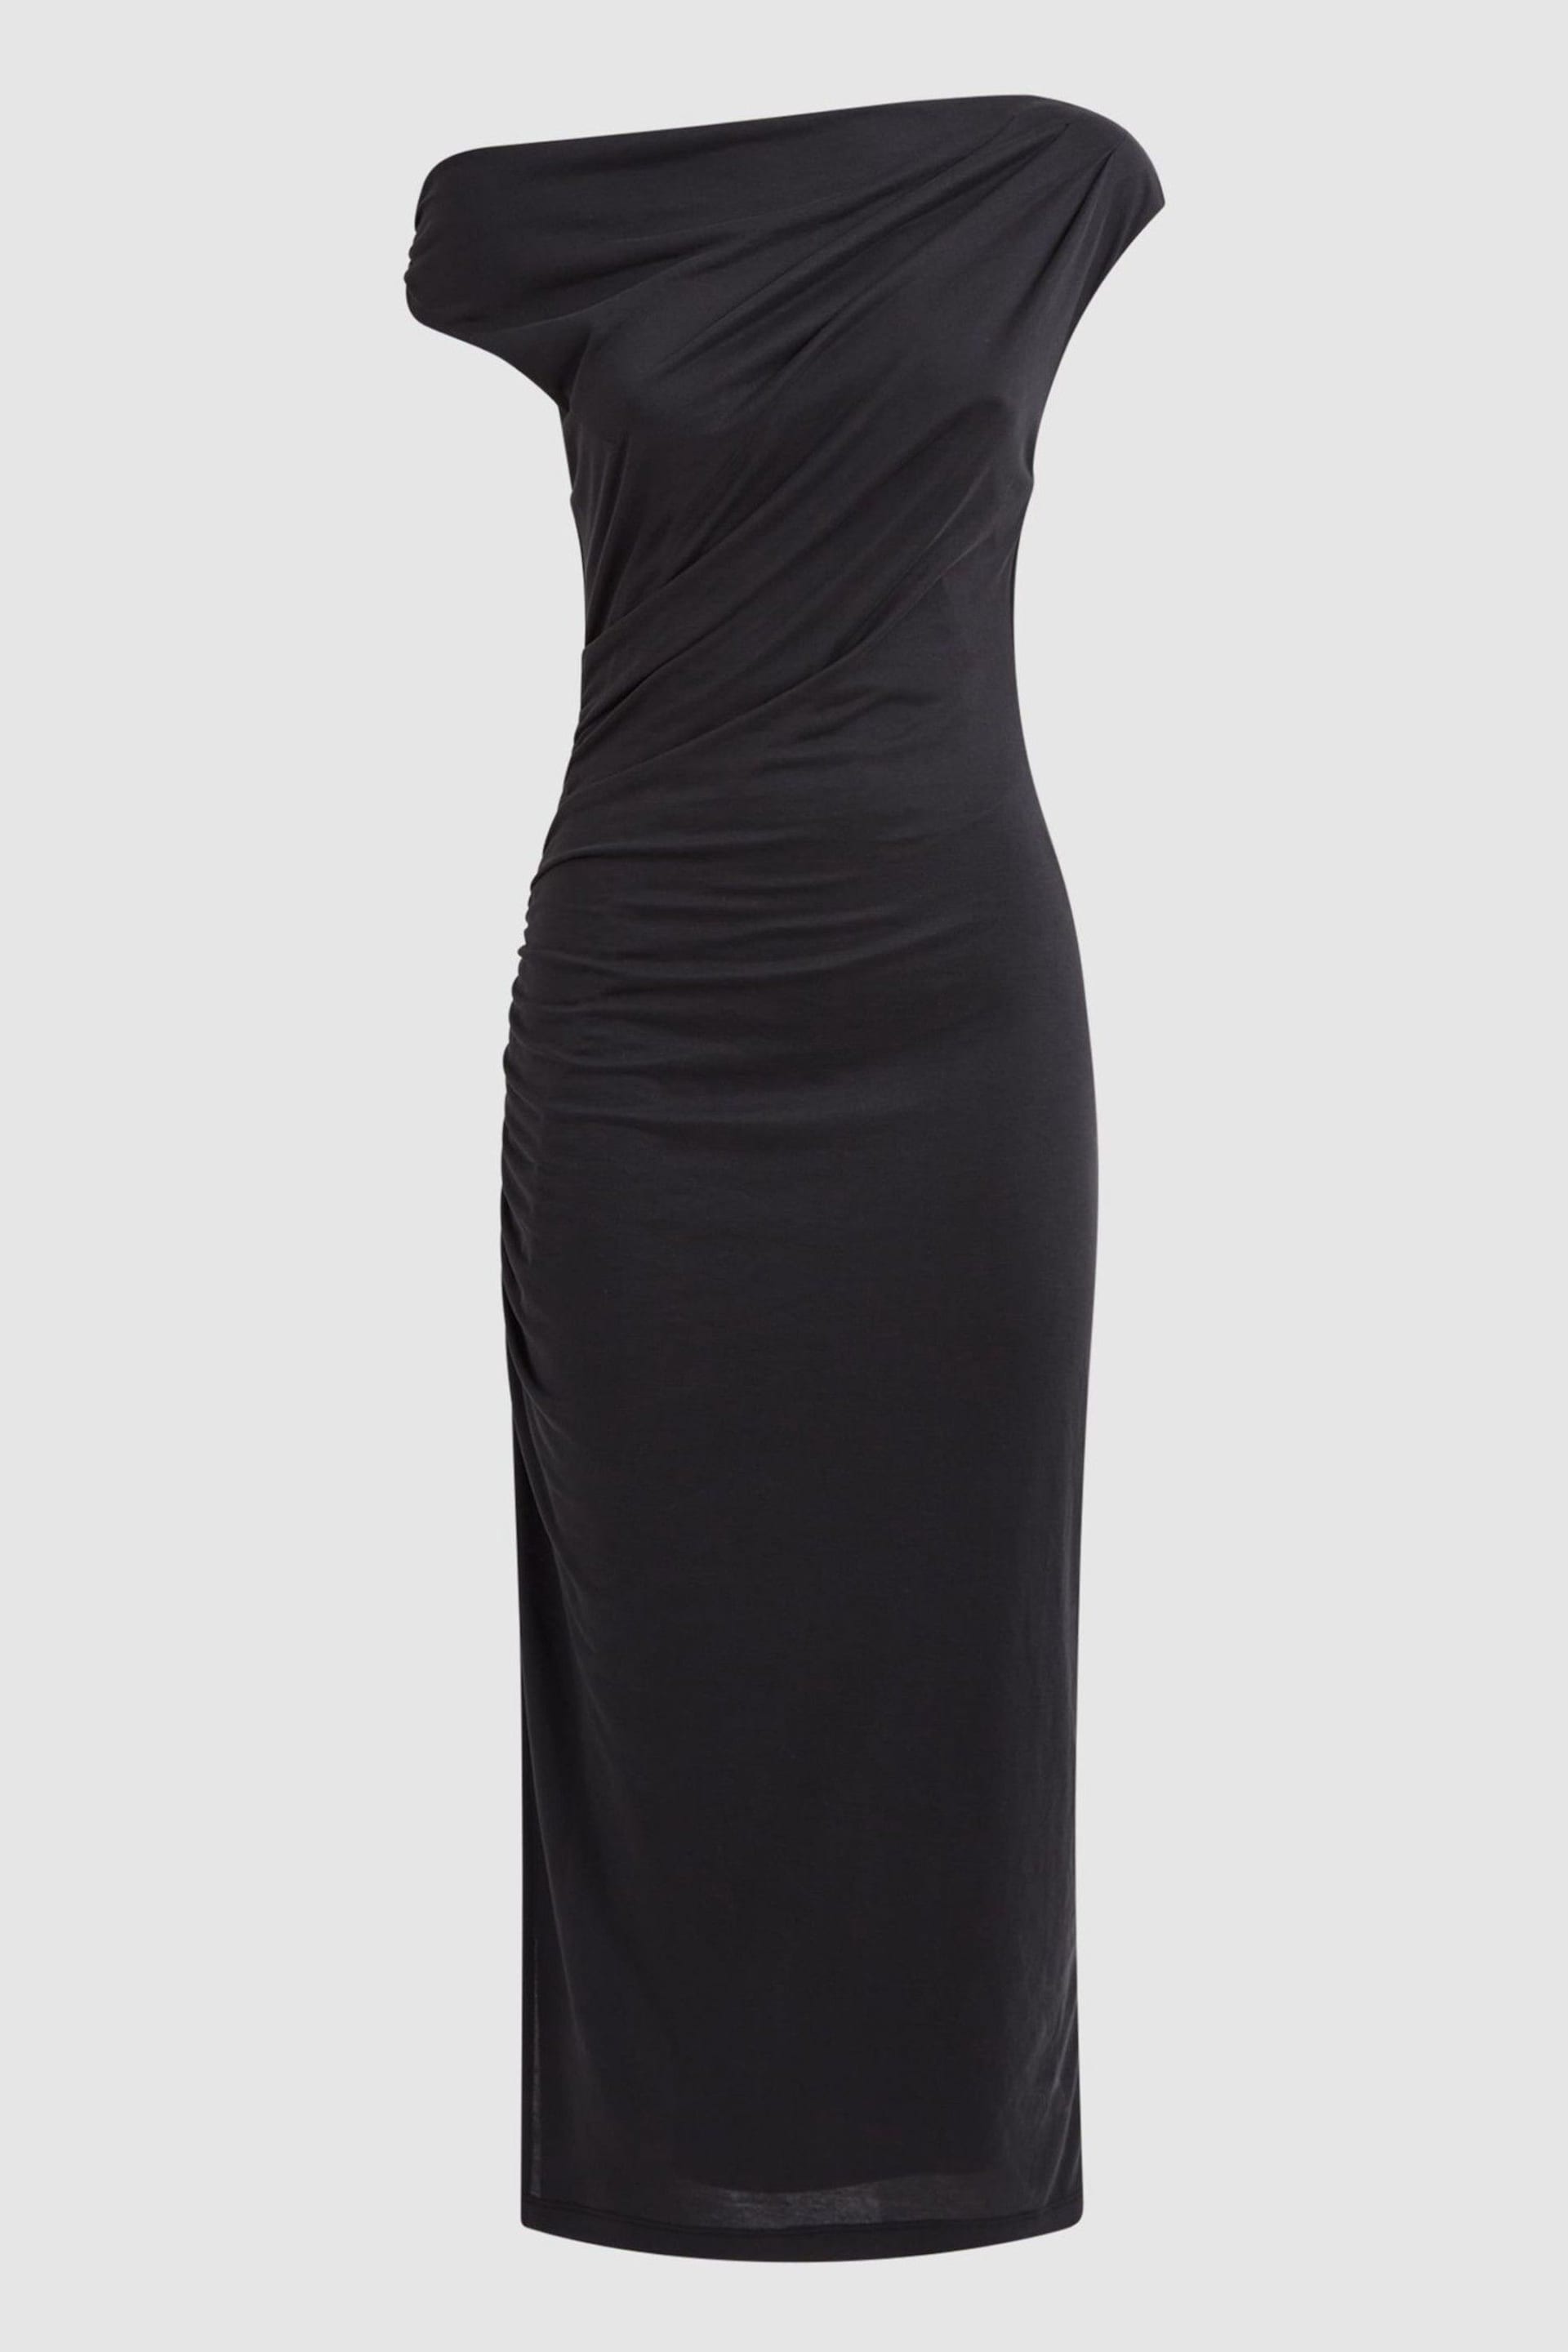 Reiss Charcoal Fern Bodycon Ruched Midi Dress - Image 2 of 4